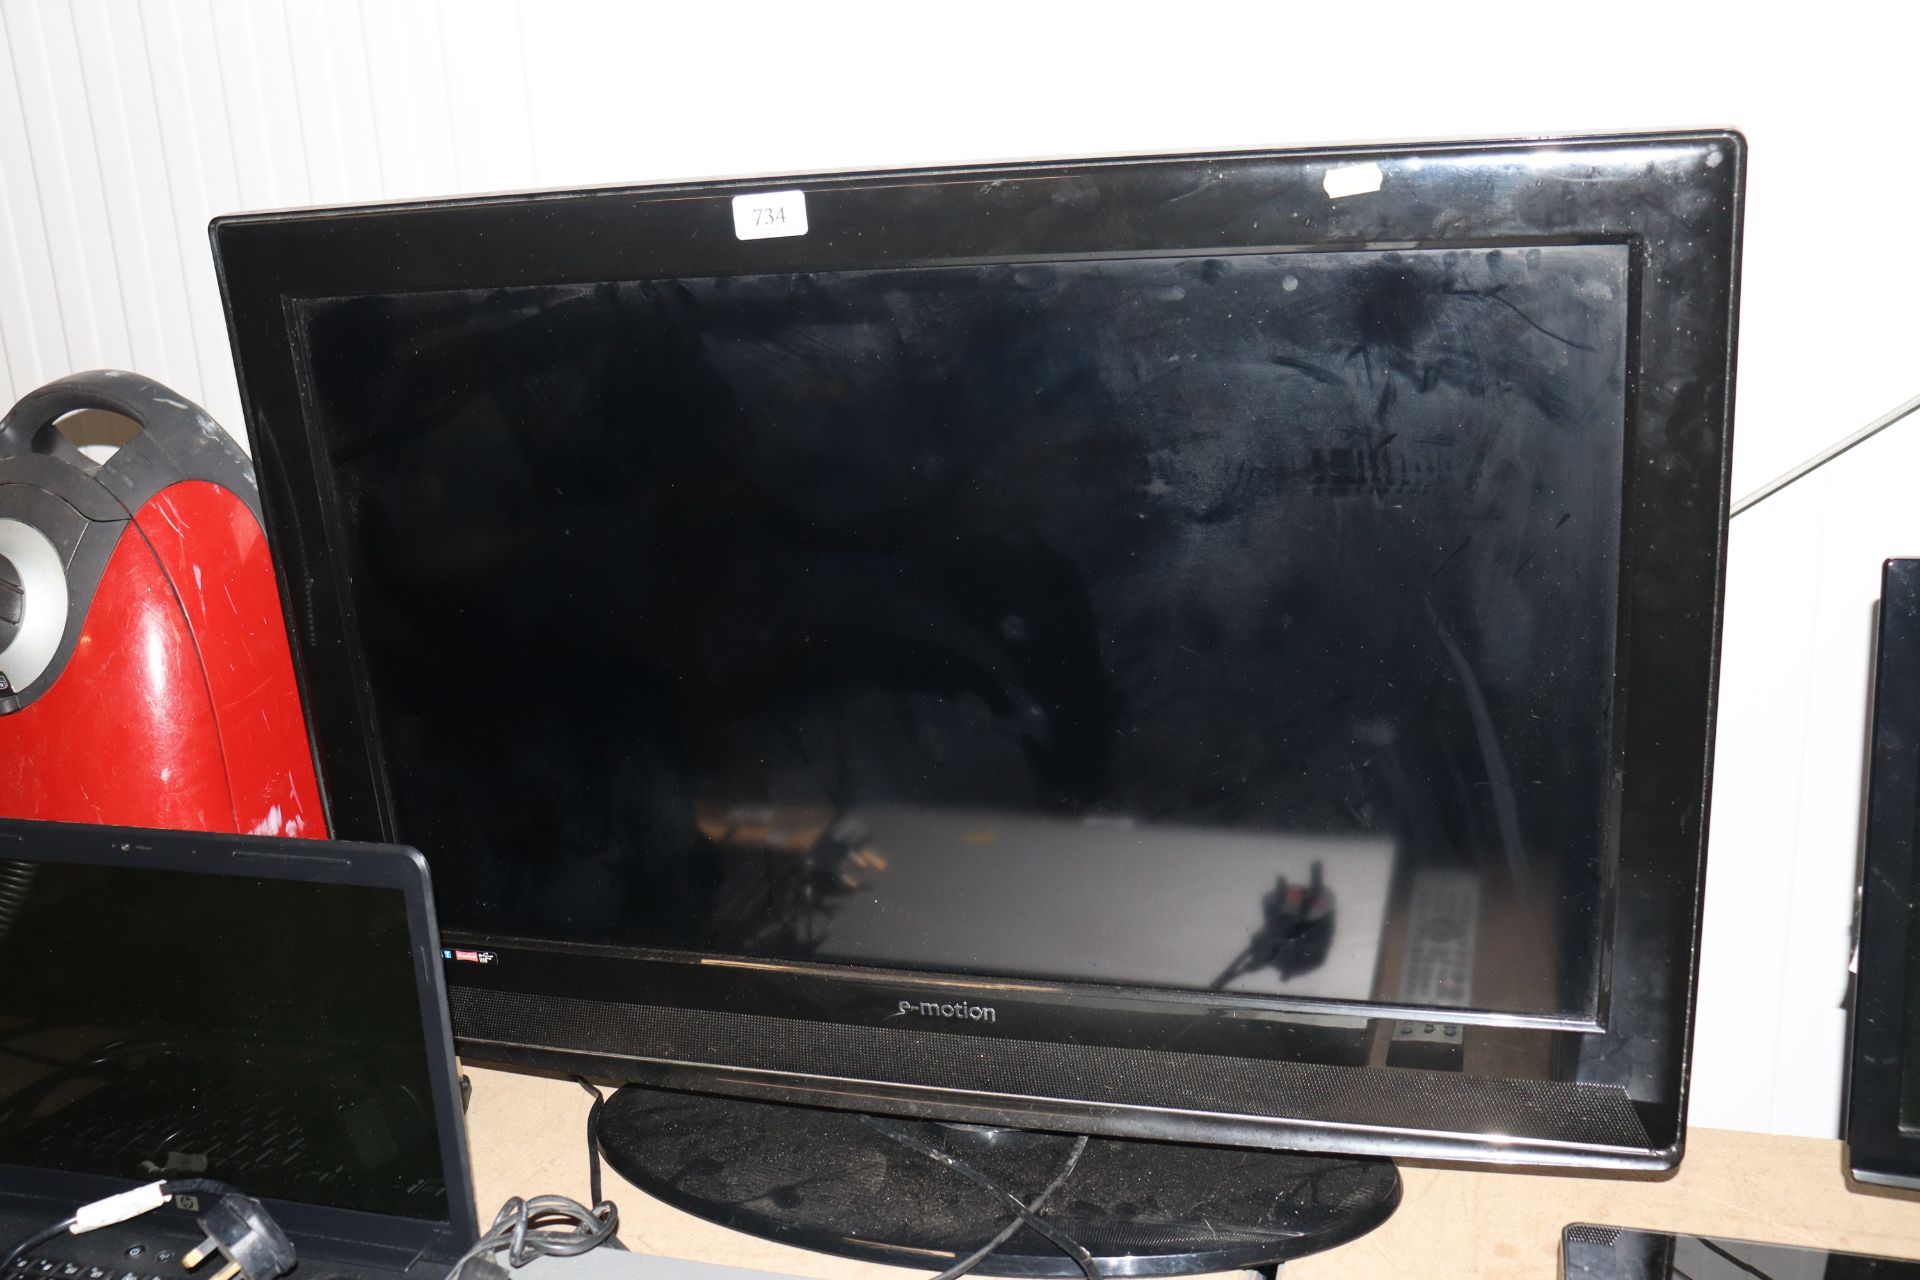 An E-Motion flat screen television lacking remote